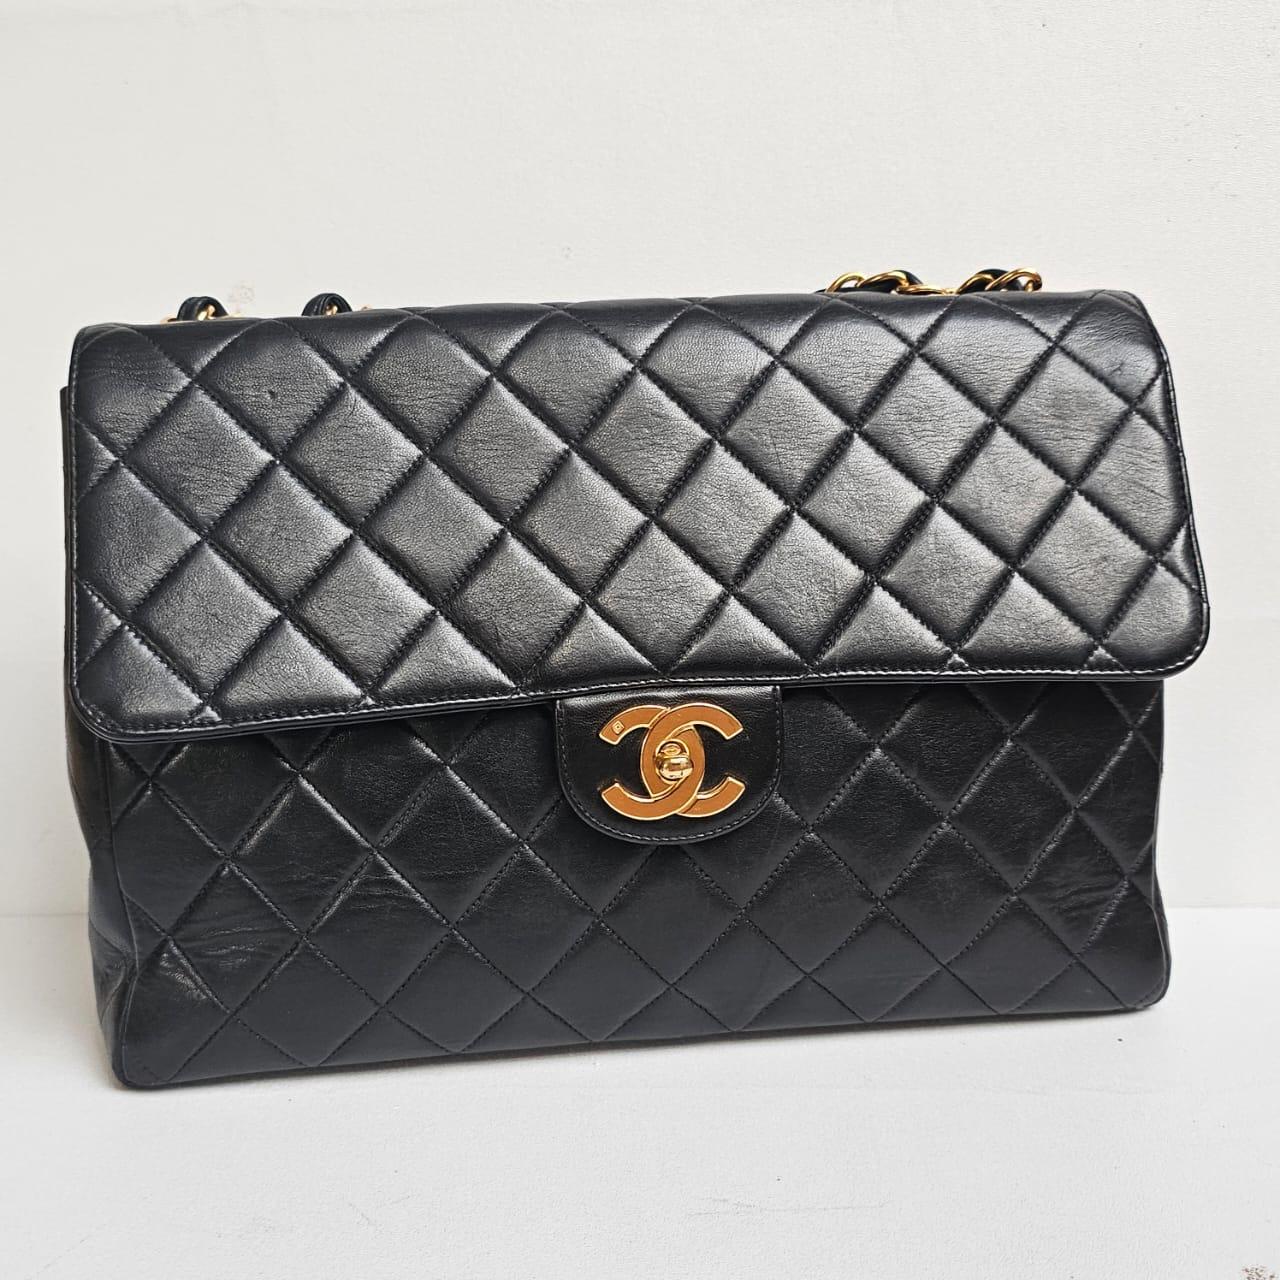 Vintage 1990s Chanel Jumbo Lambskin Quilted Jumbo Flap Bag For Sale 10